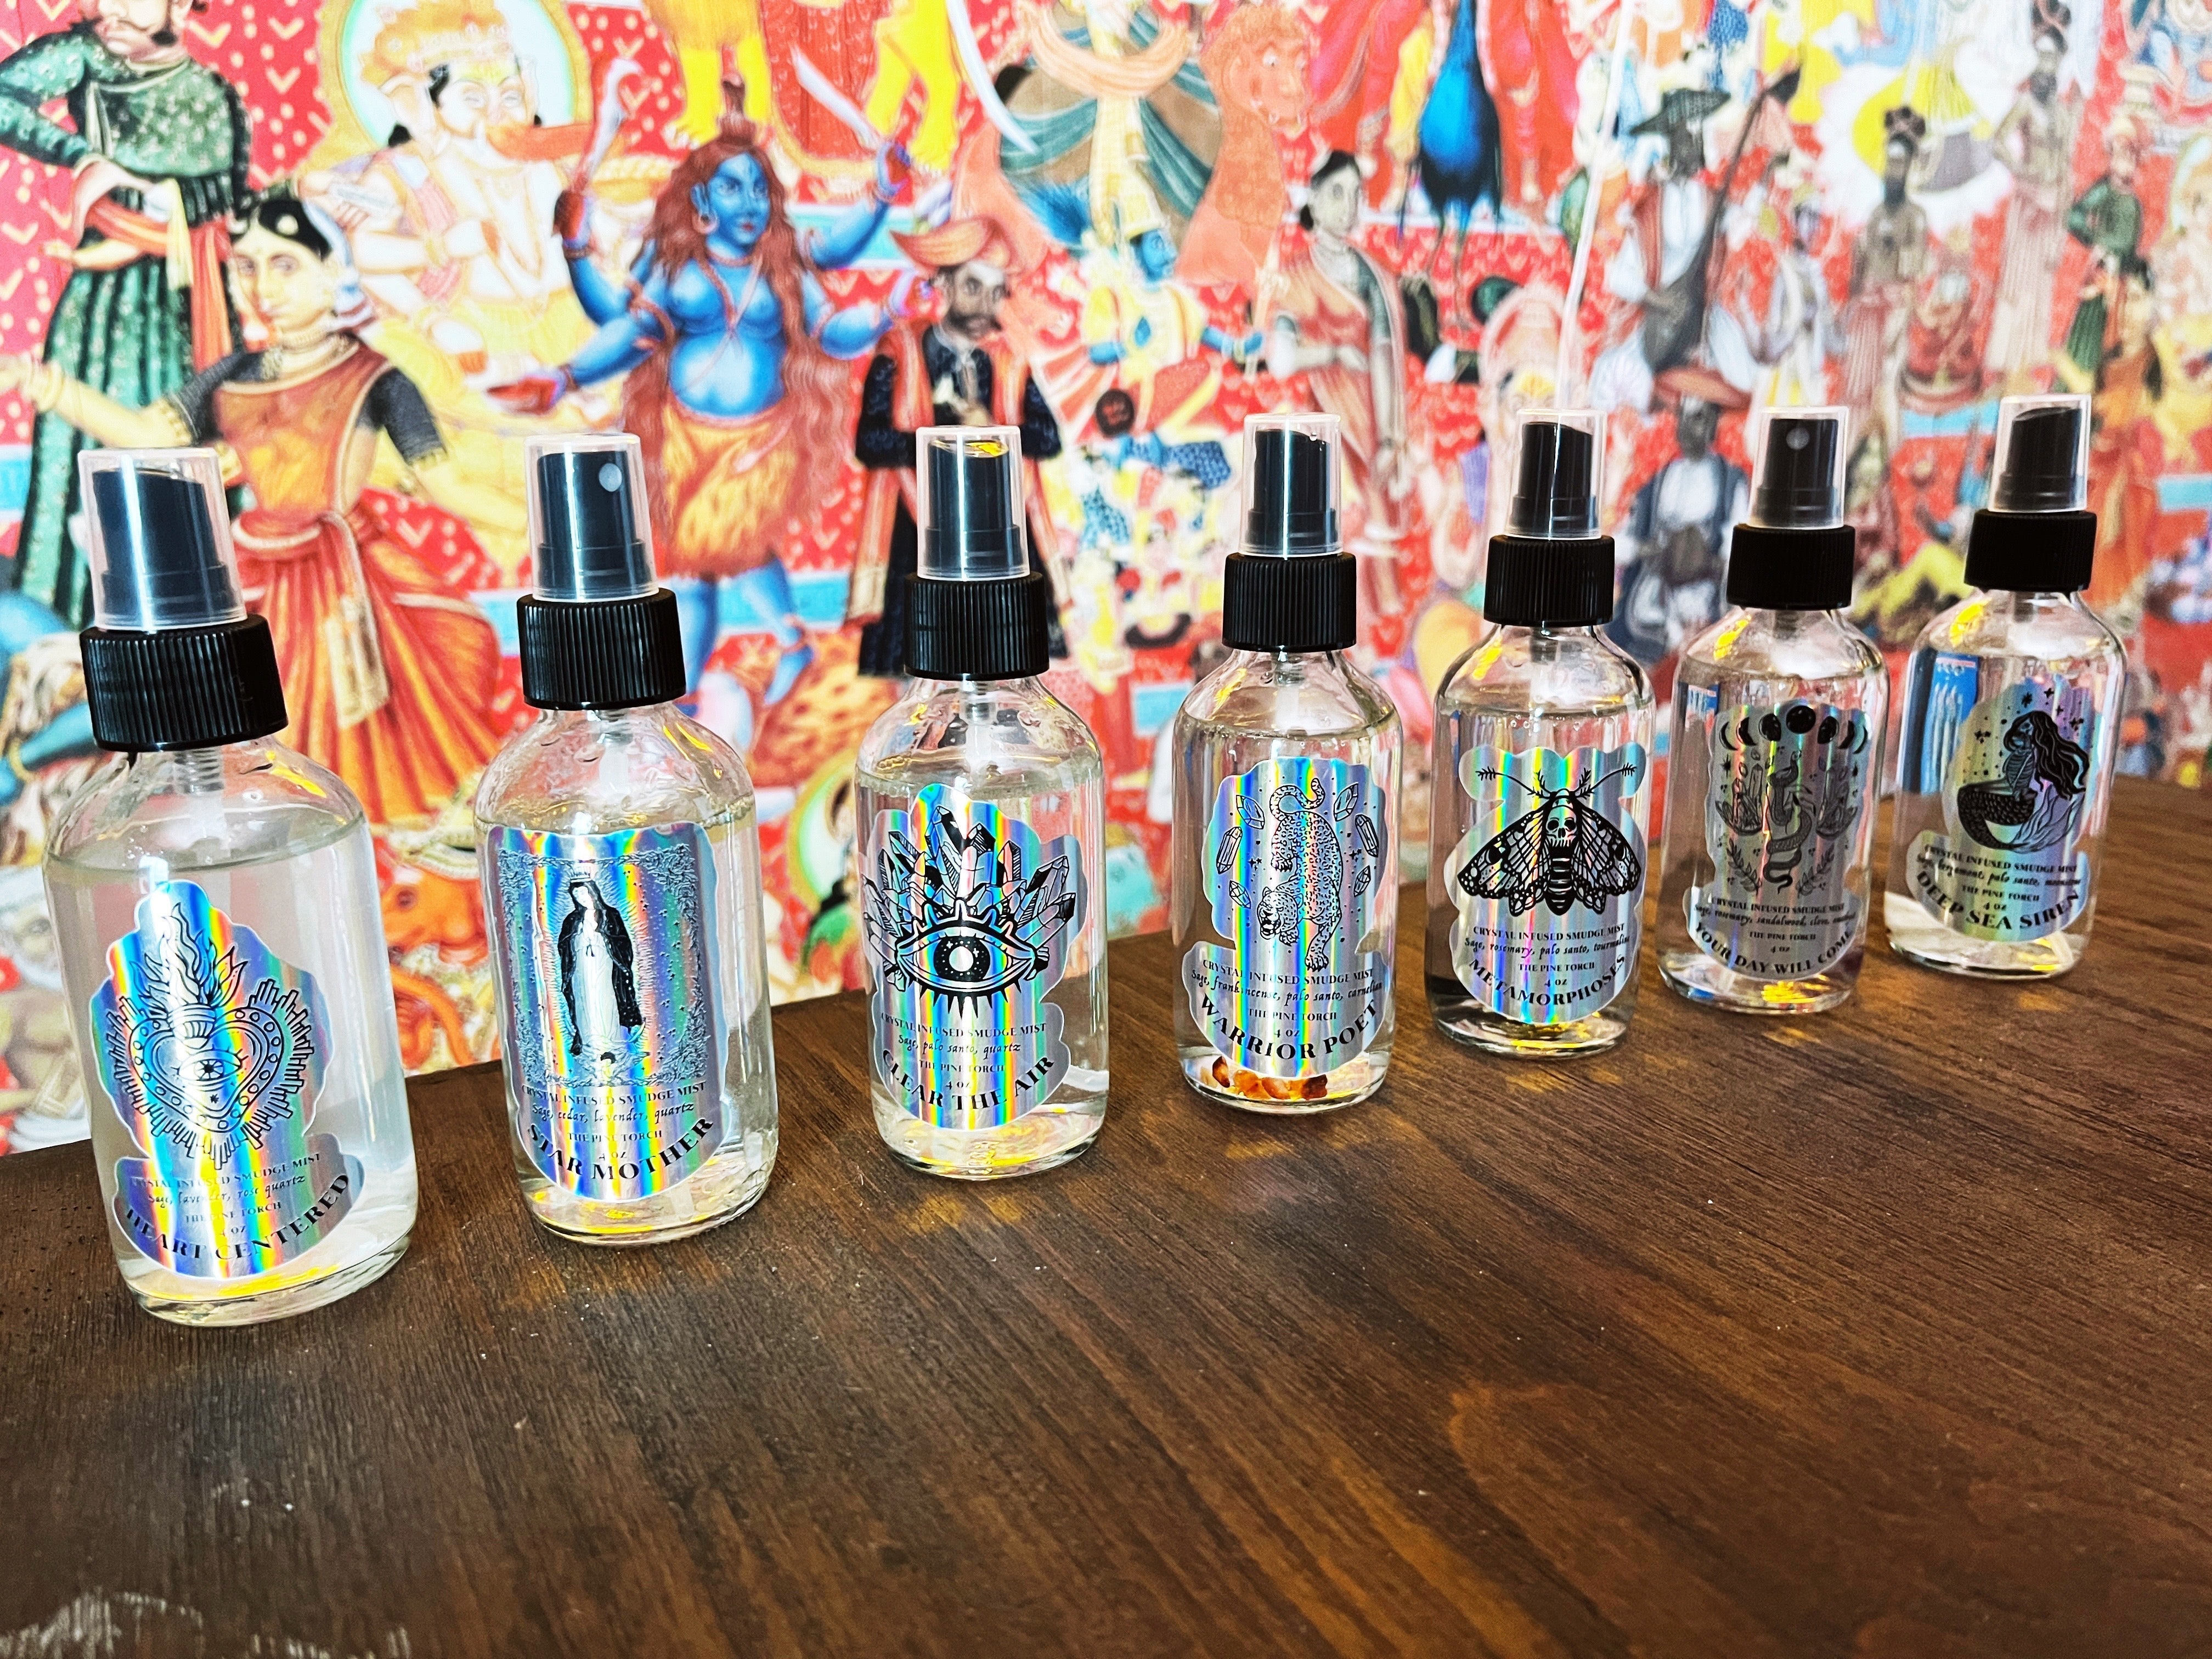 CLEAR THE AIR << CRYSTAL INFUSED SMUDGE MIST >>